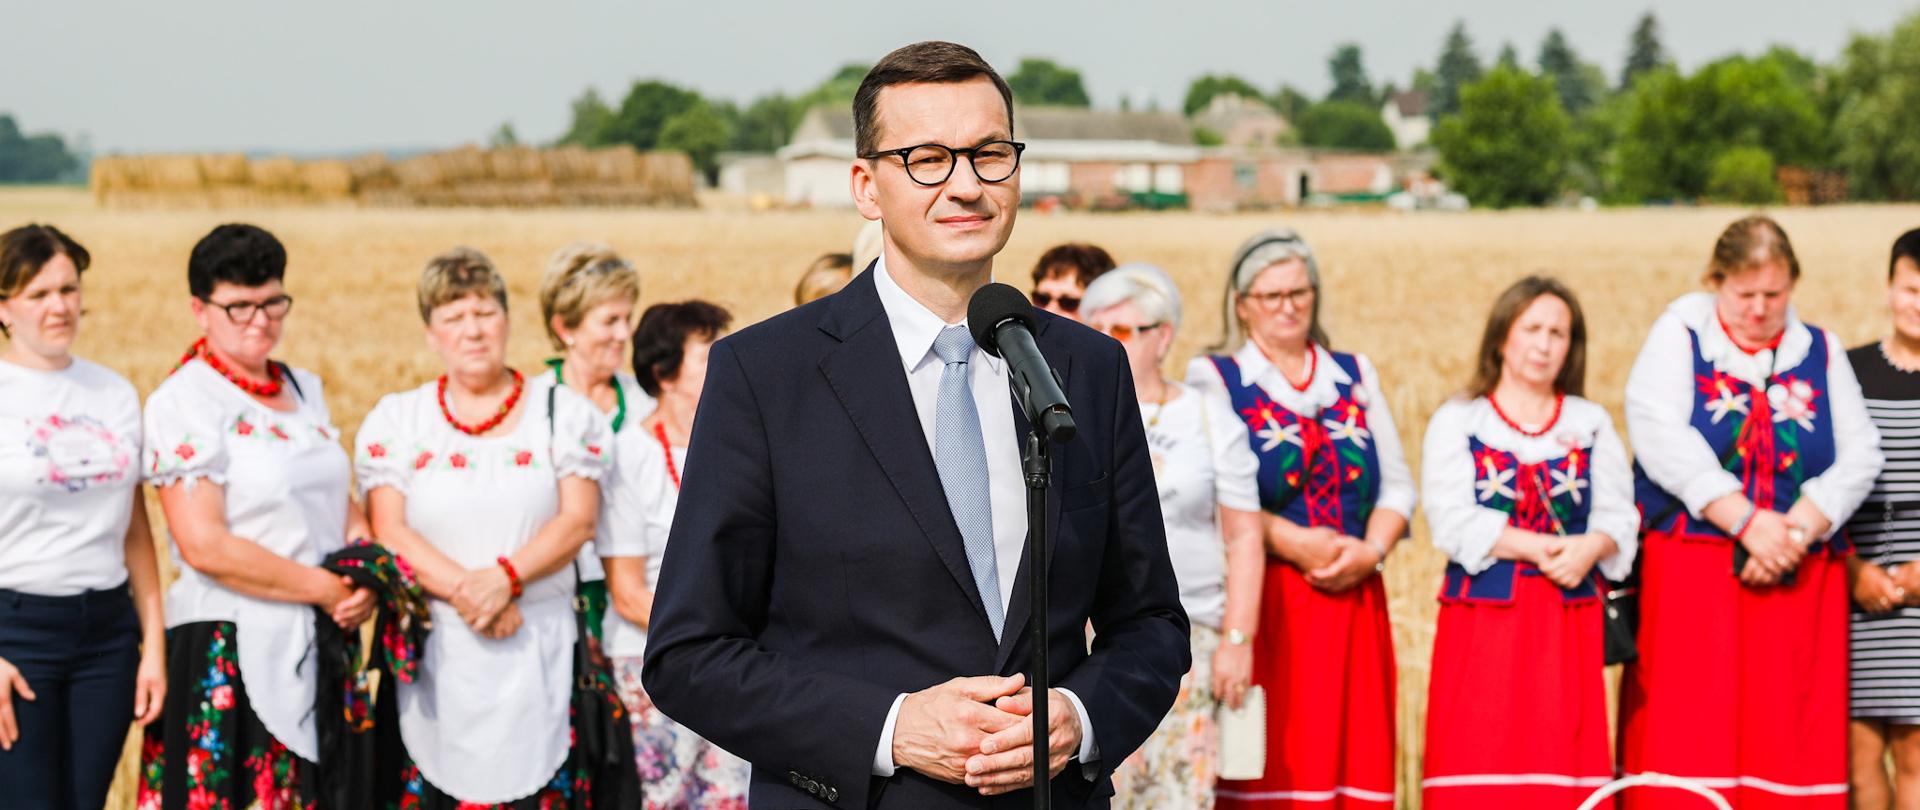 Prime Minister Mateusz Morawiecki in visit of a agricultural holding